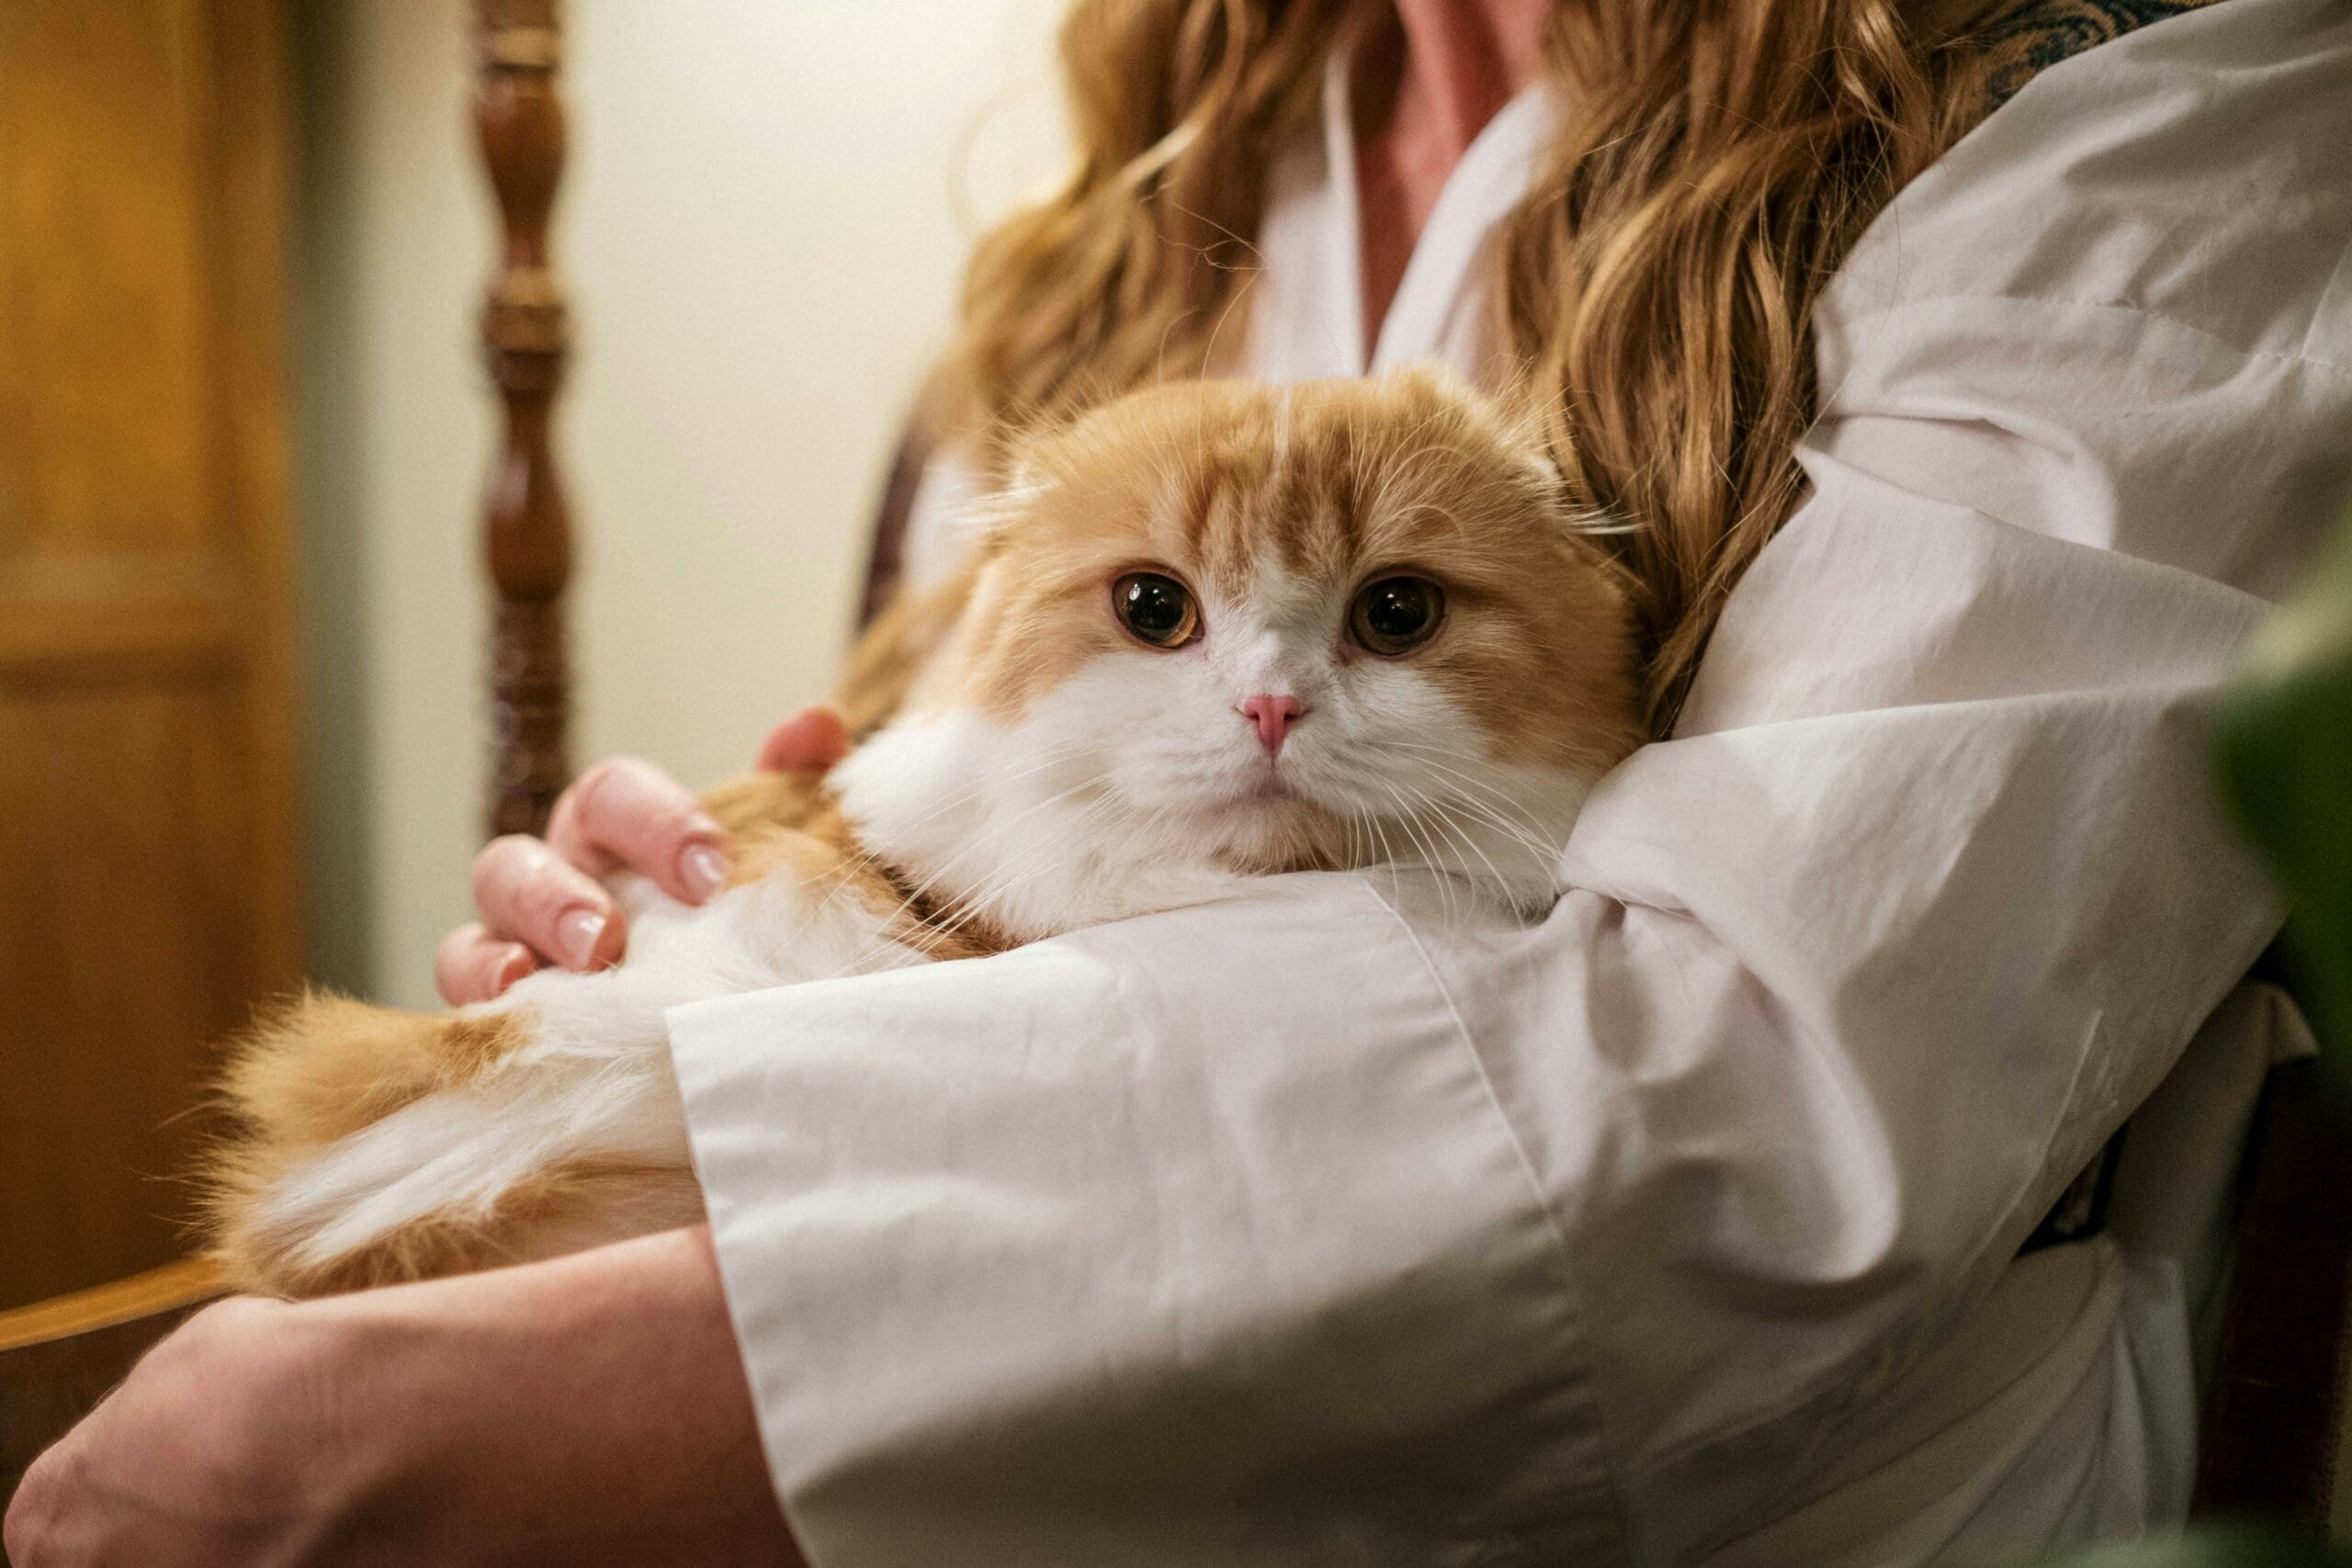 A woman  holds a fluffy cat, illustrating the emotional stakes in pet custody during divorce.